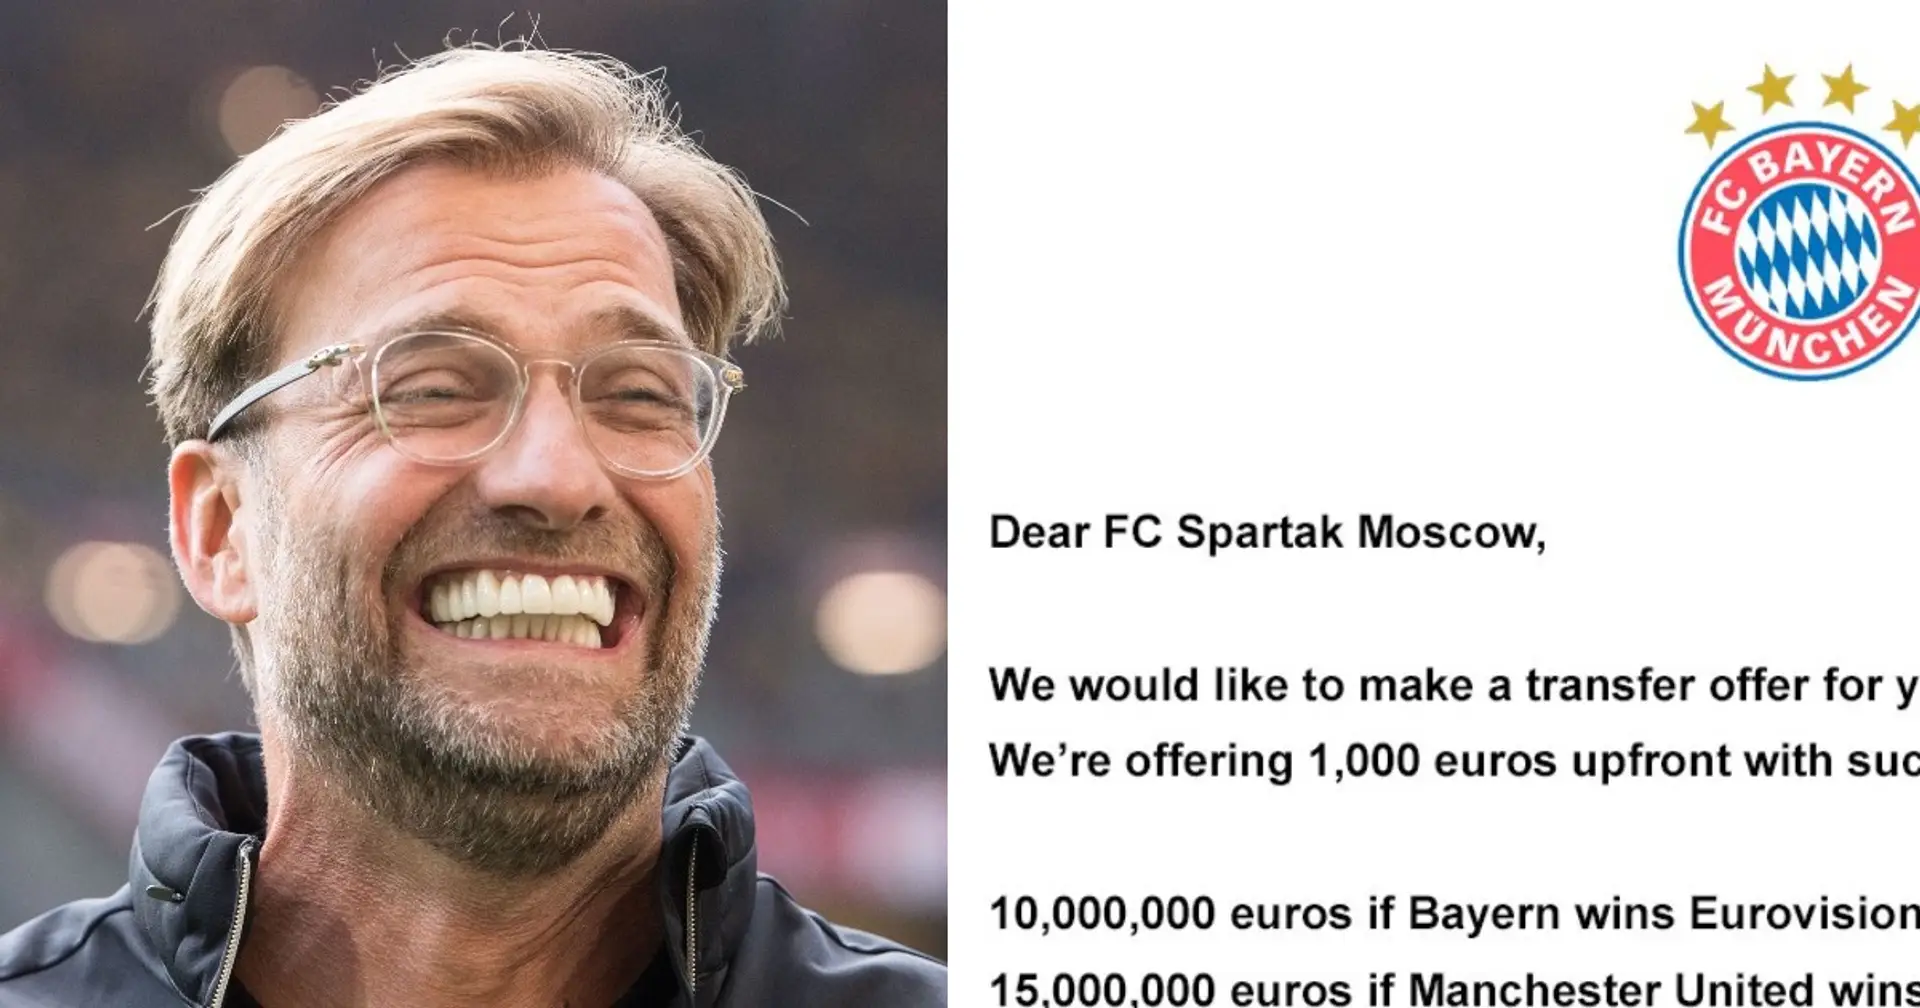 '€15 million if Man Utd win a trophy...': Spartak Moscow share hilarious post after ridiculous Bayern bid for Mane